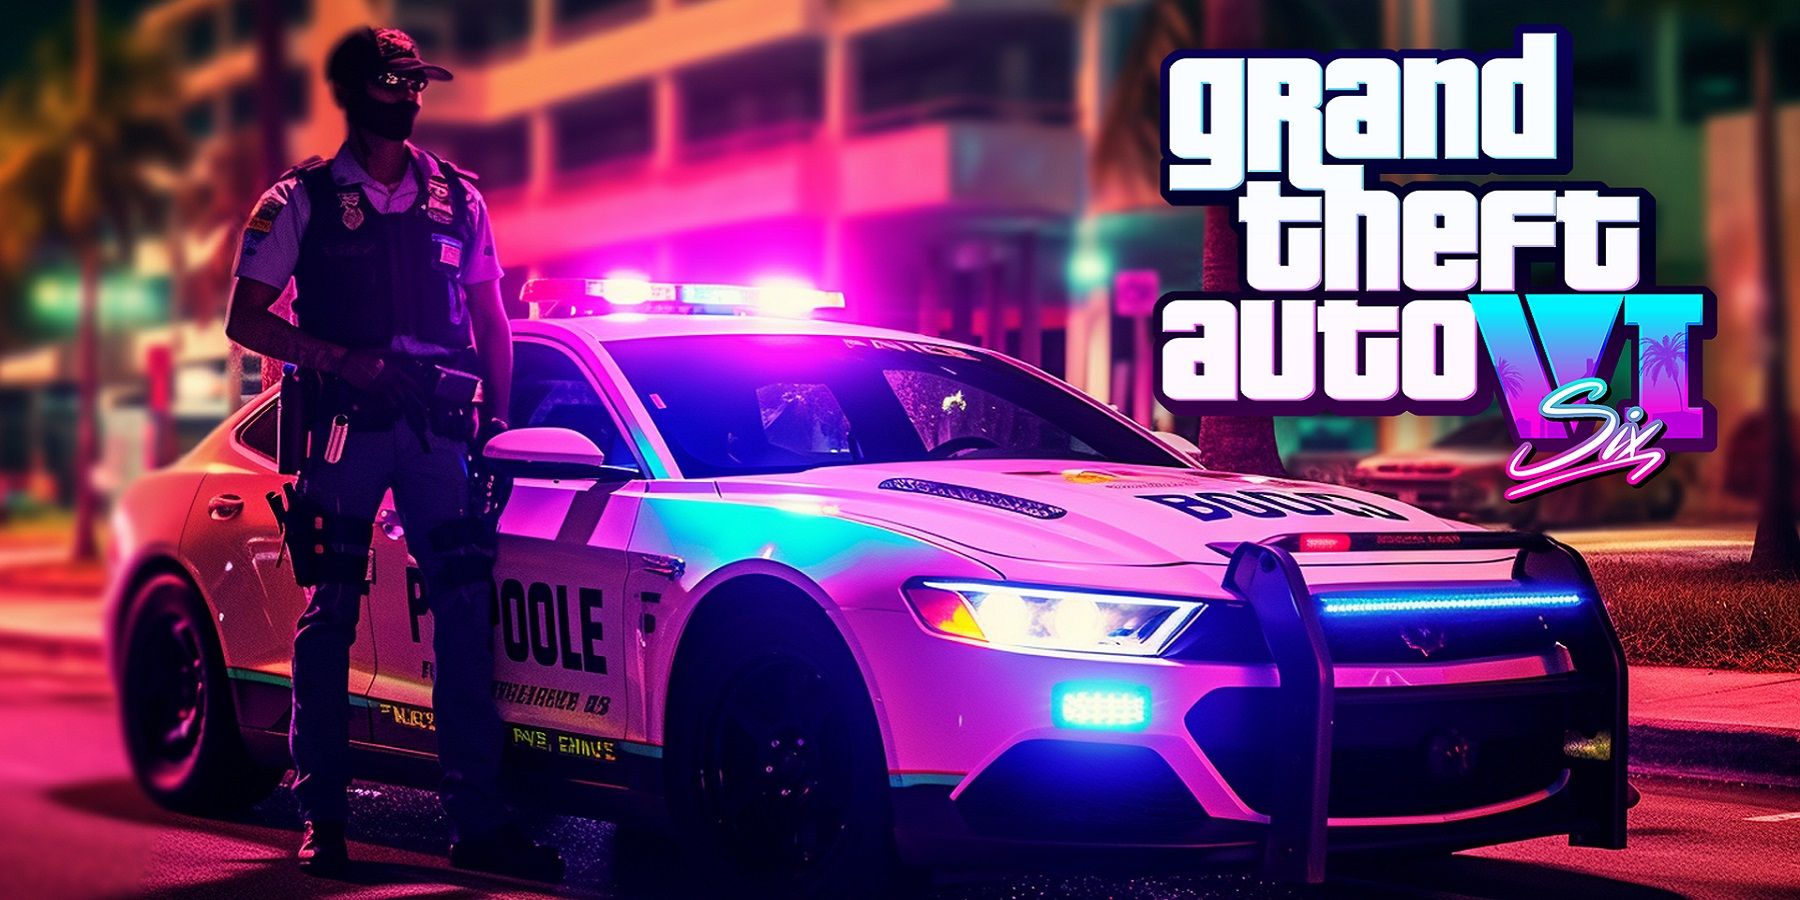 A Grand Theft Auto 6 image showing a police officer stood by a car that's flashing its lights.